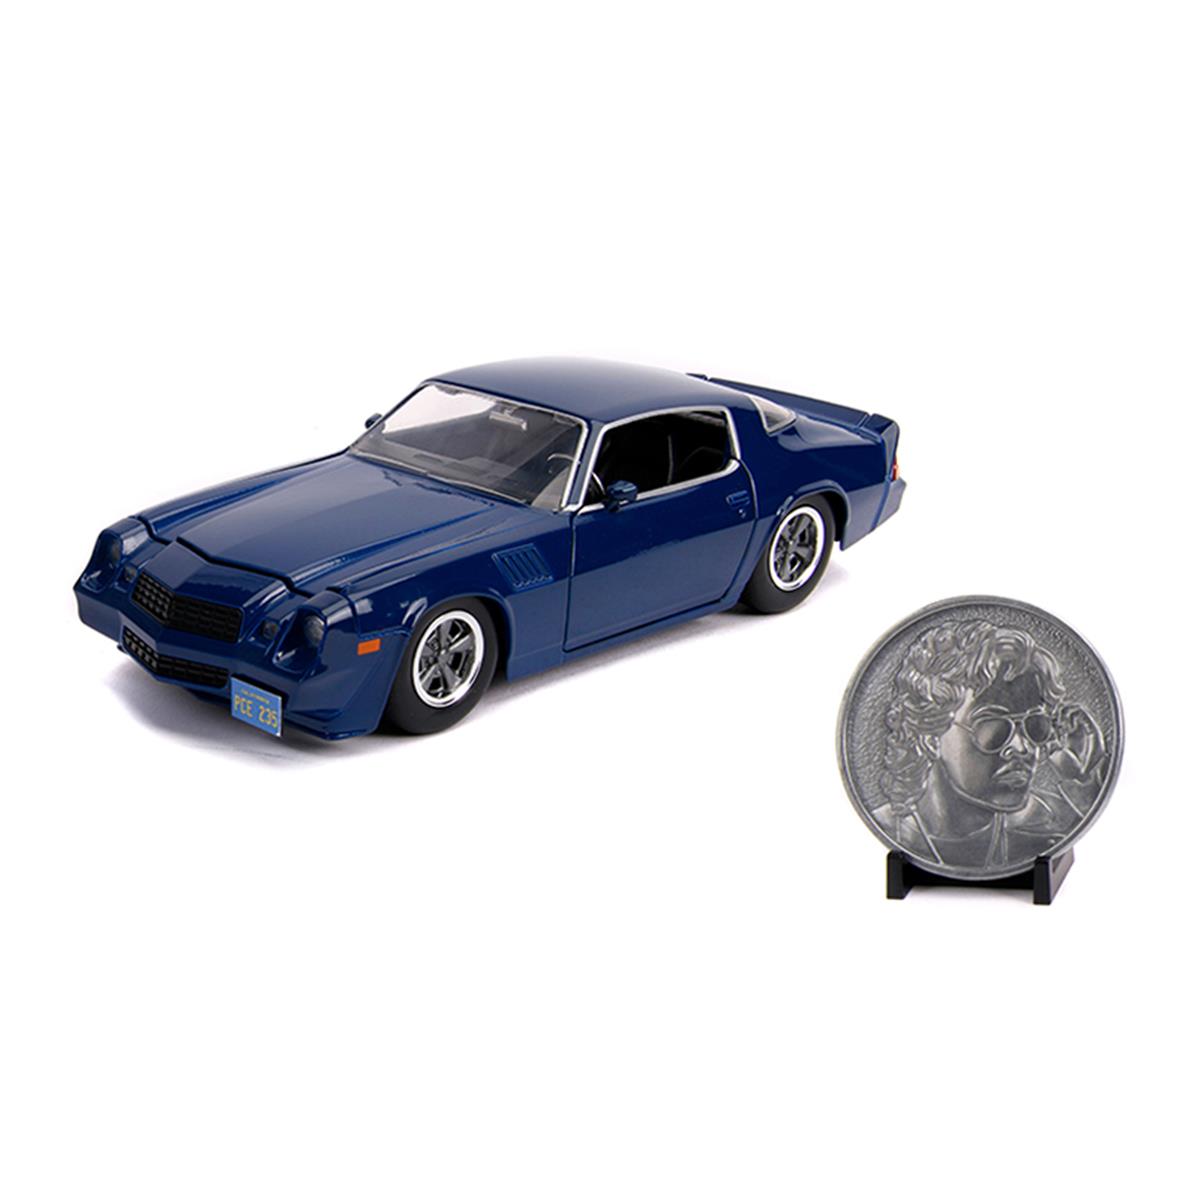 1 By 24 Scale Stranger Things Billys Diecast Model Car For Chevy Camaro Z28 With Collectible Coin, Dark Blue